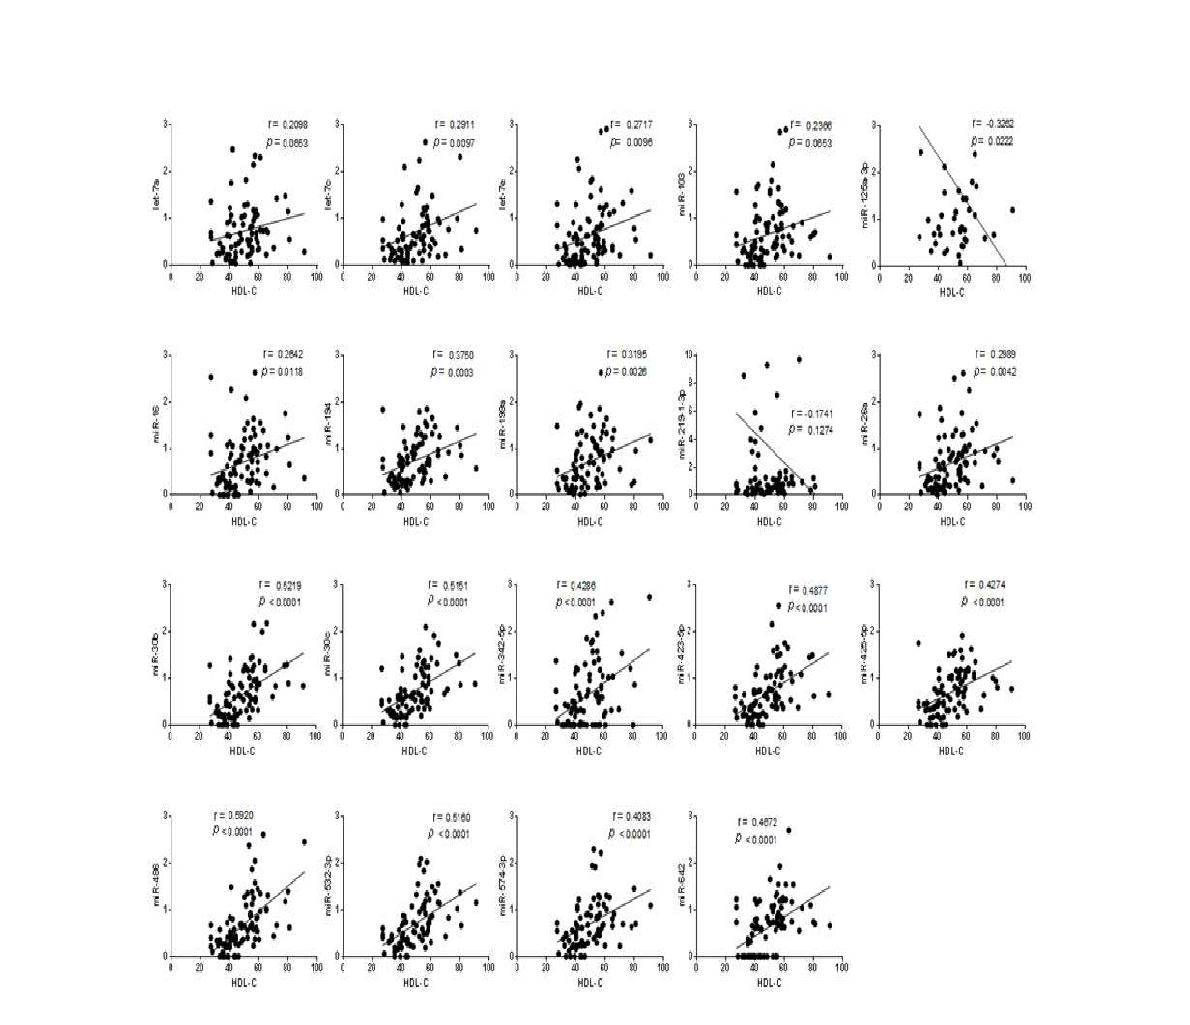 Correlation between hyperlipidemia specific circulating miRNAs and HDL-cholesterol